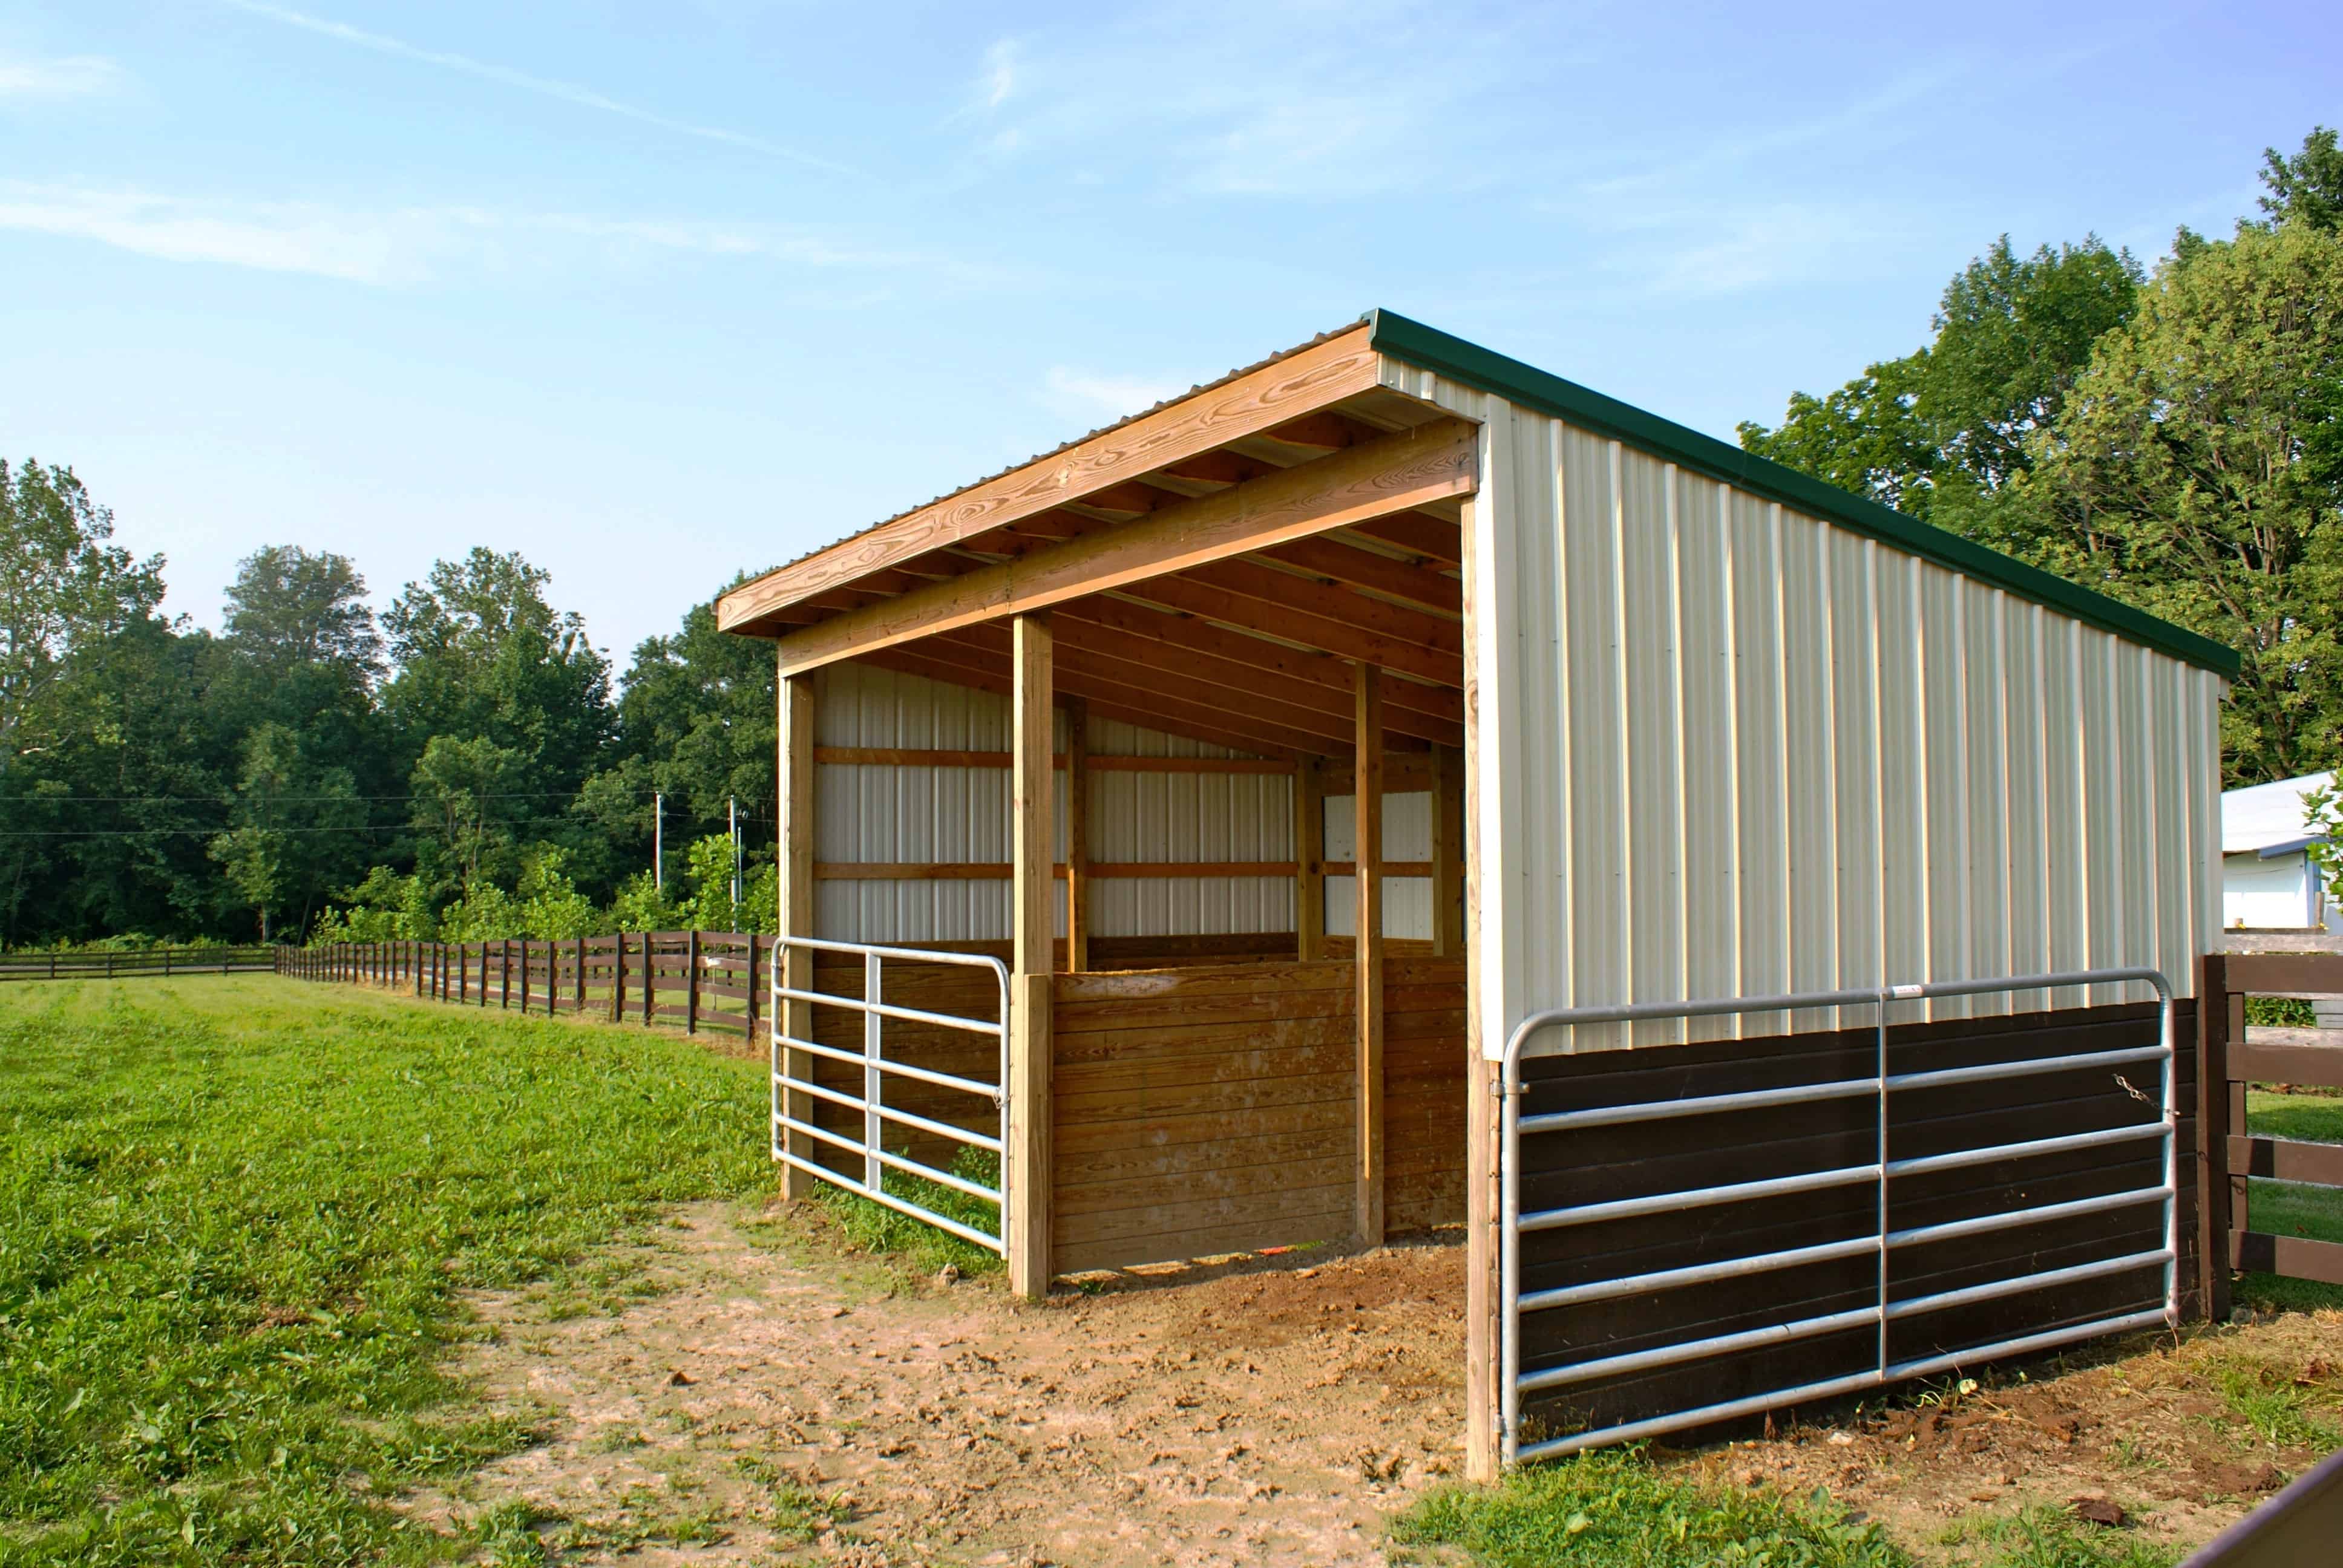 diy horse run in shed plans!!@ HoMeMaDe ShEd PlAnS **@